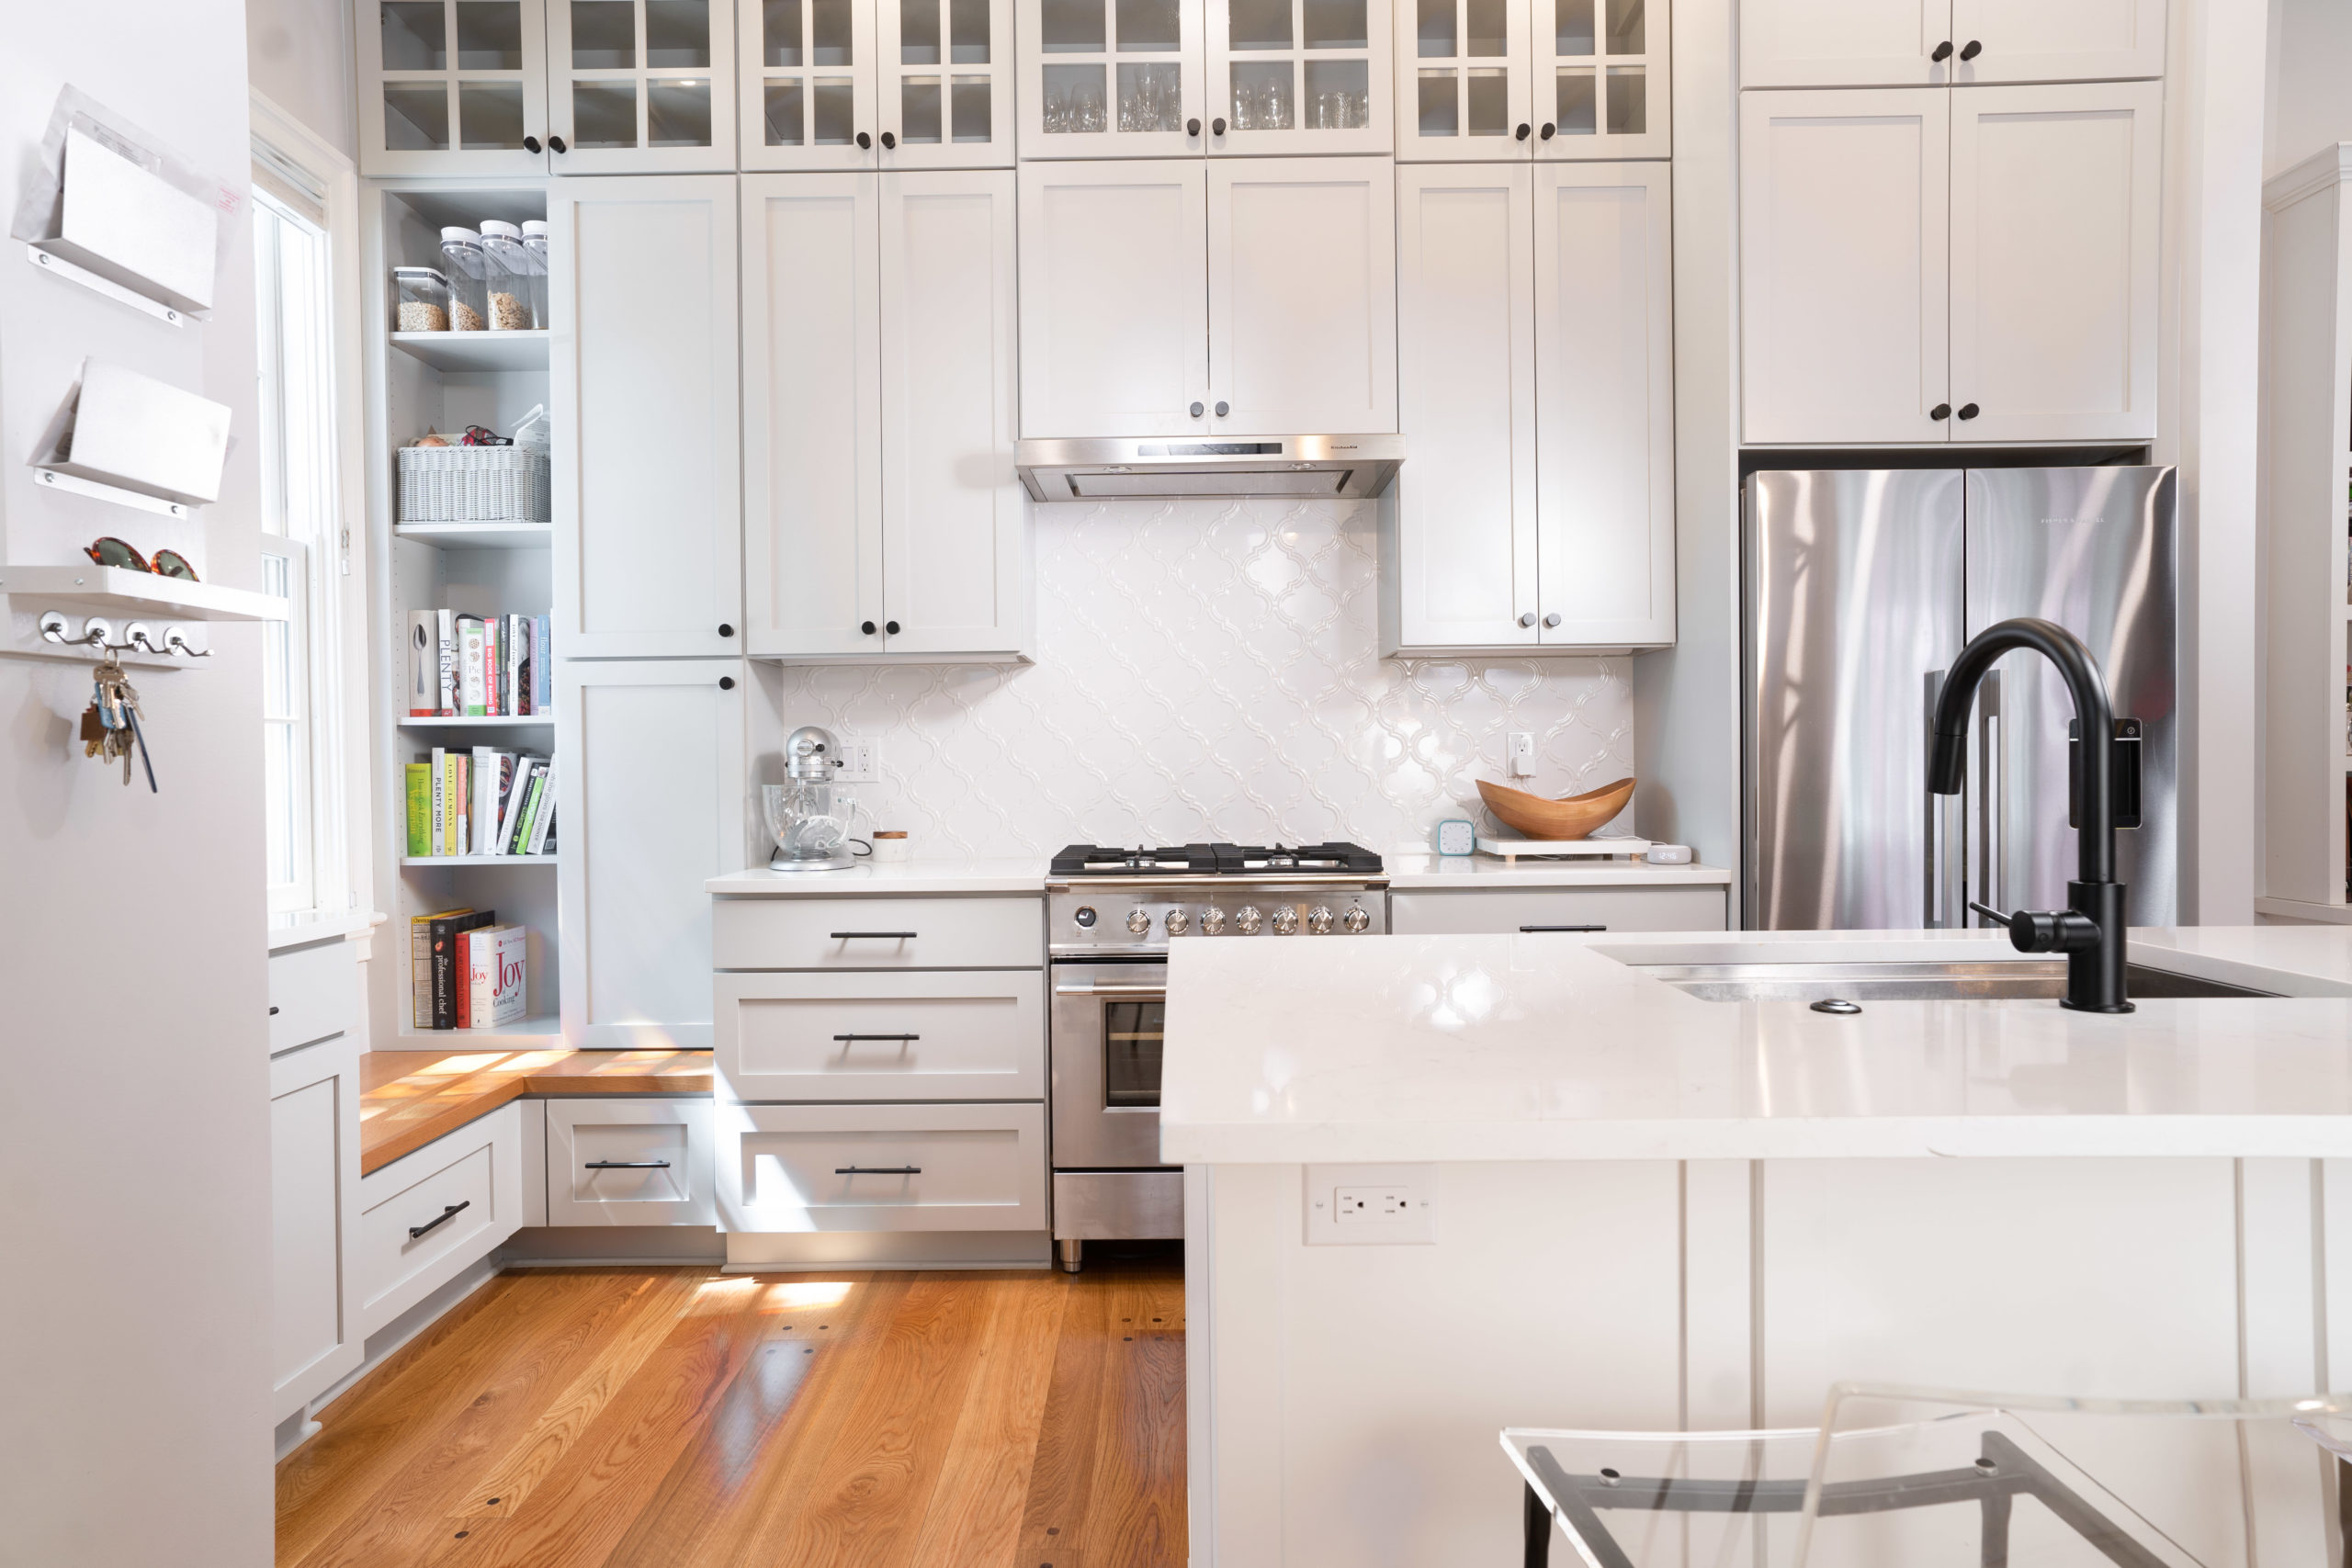 A white, recently-remodeled kitchen with island.